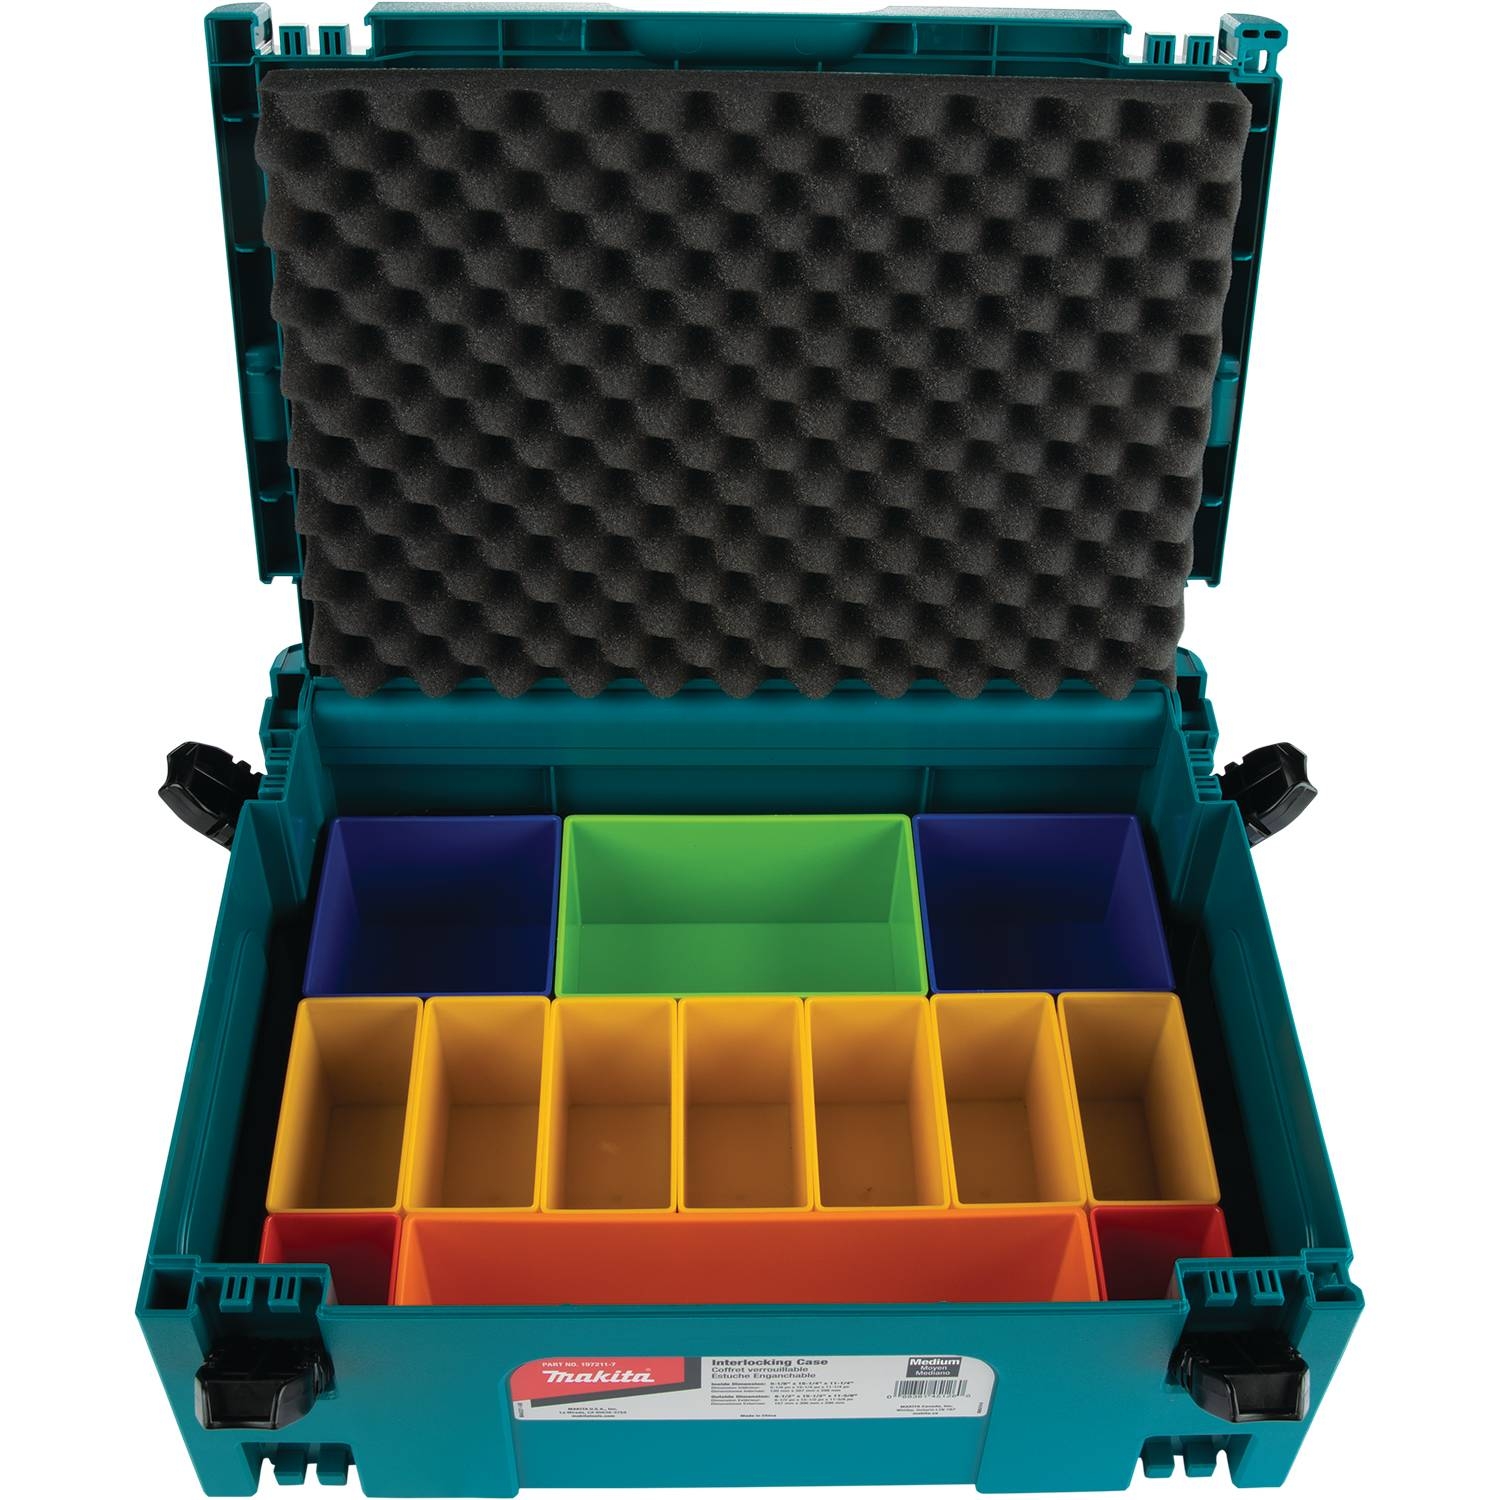 https://www.toolnut.com/media/catalog/product/m/a/makita-p-83652-feature-shot-in-medium-case.jpg?quality=100&bg-color=255,255,255&fit=bounds&height=&width=&canvas=: